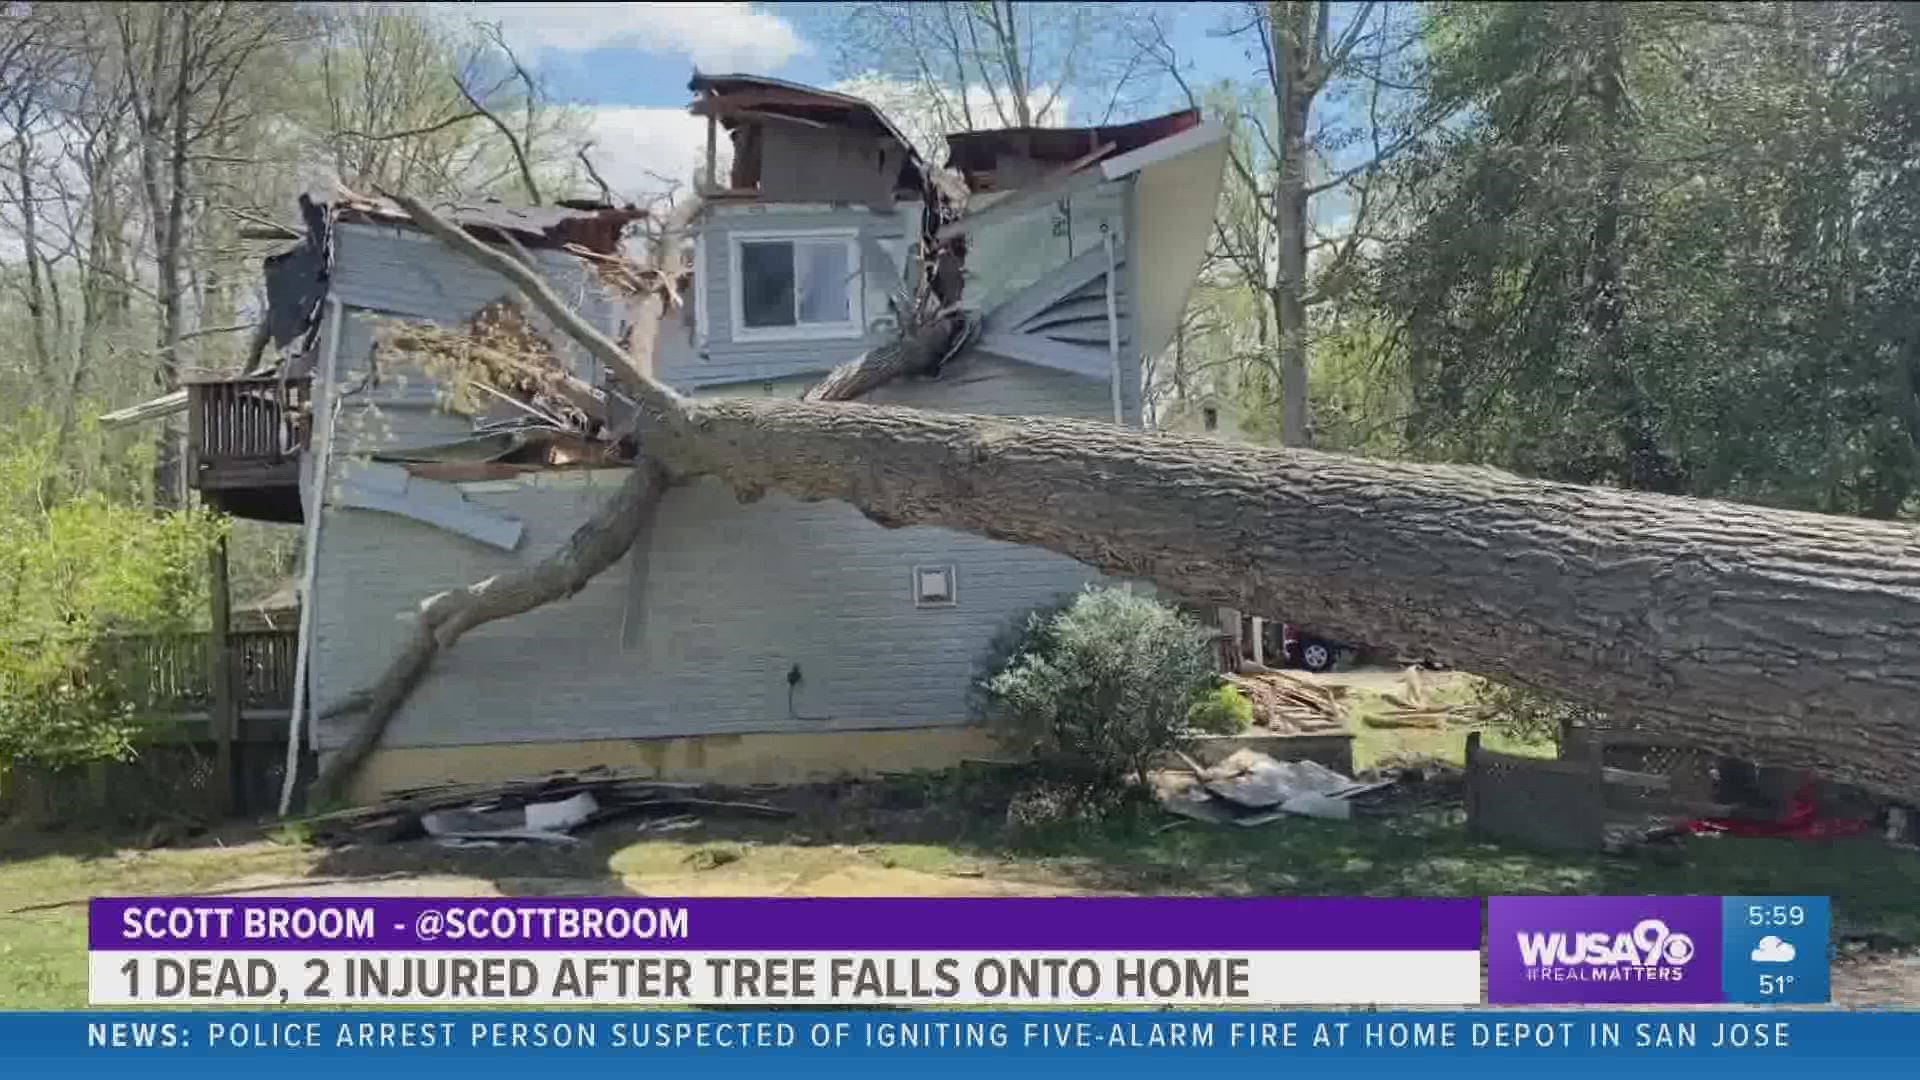 Both trees fell together and without warning after a day of heavy rain and hours of sustained winds nearing 30 miles per hour with higher gusts, an arborist said.